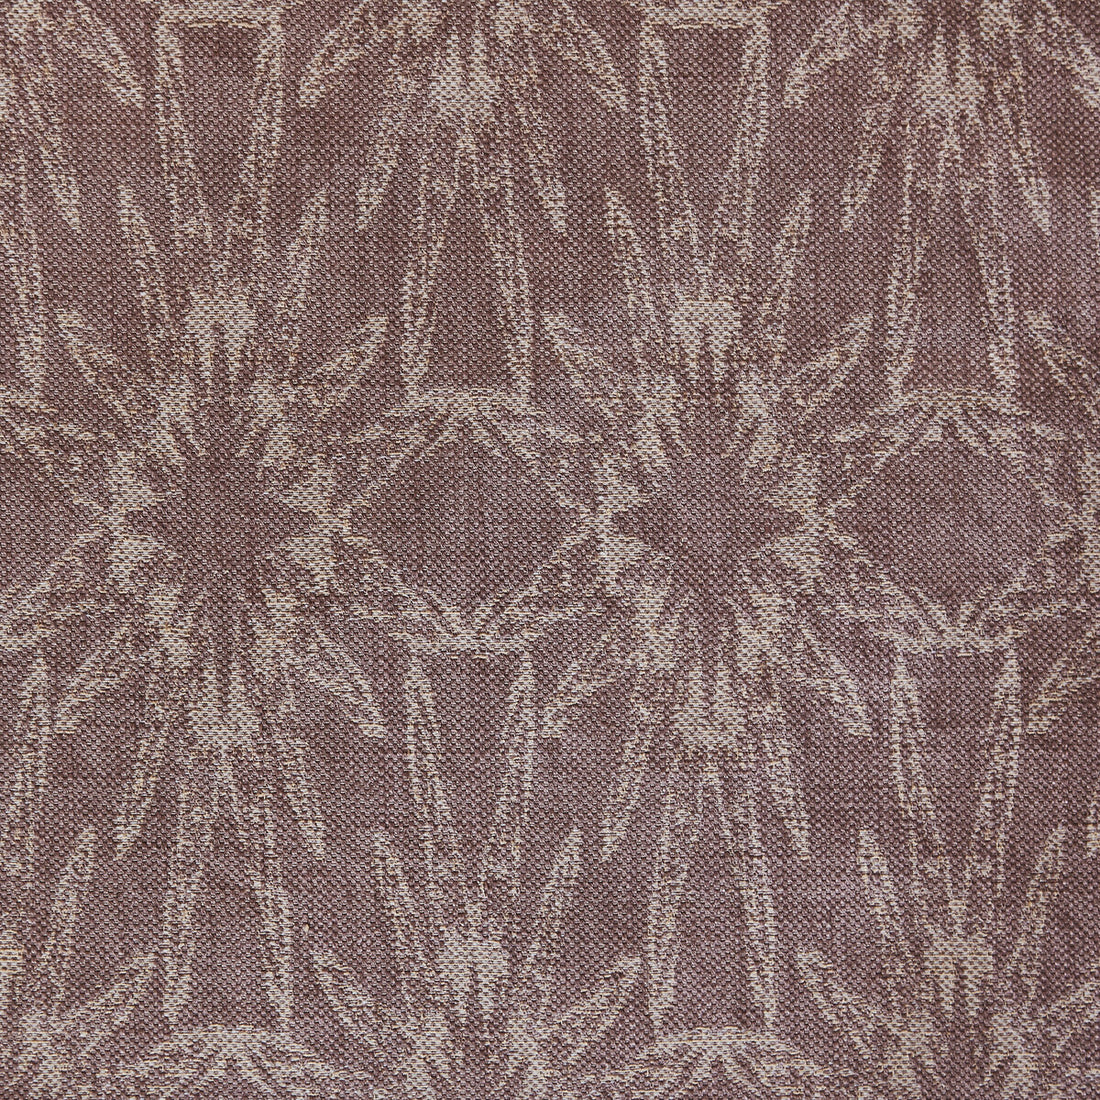 Starfish fabric in mauve color - pattern GWF-3202.10.0 - by Lee Jofa Modern in the Allegra Hicks Islands collection